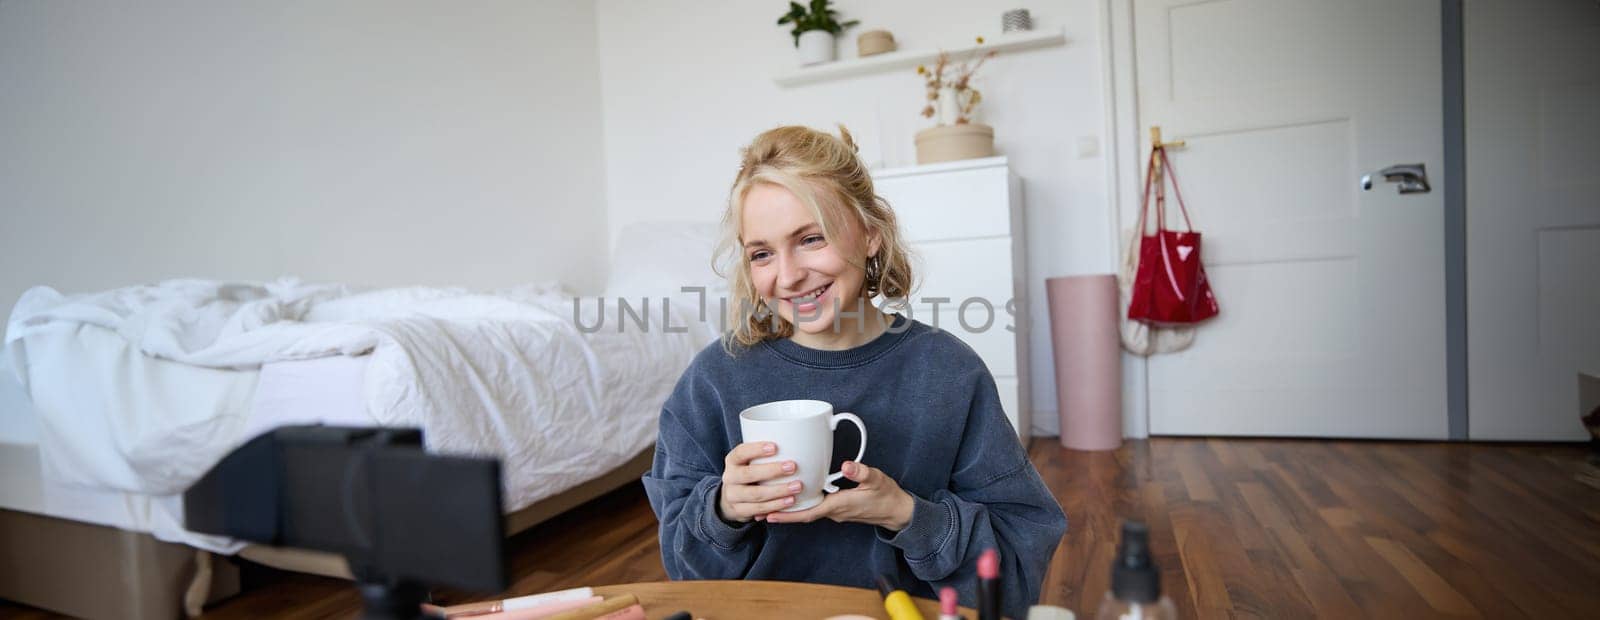 Portrait of beautiful social media beauty blogger, sitting in front of digital camera on floor in bedroom, drinking tea and chatting, talking to followers.